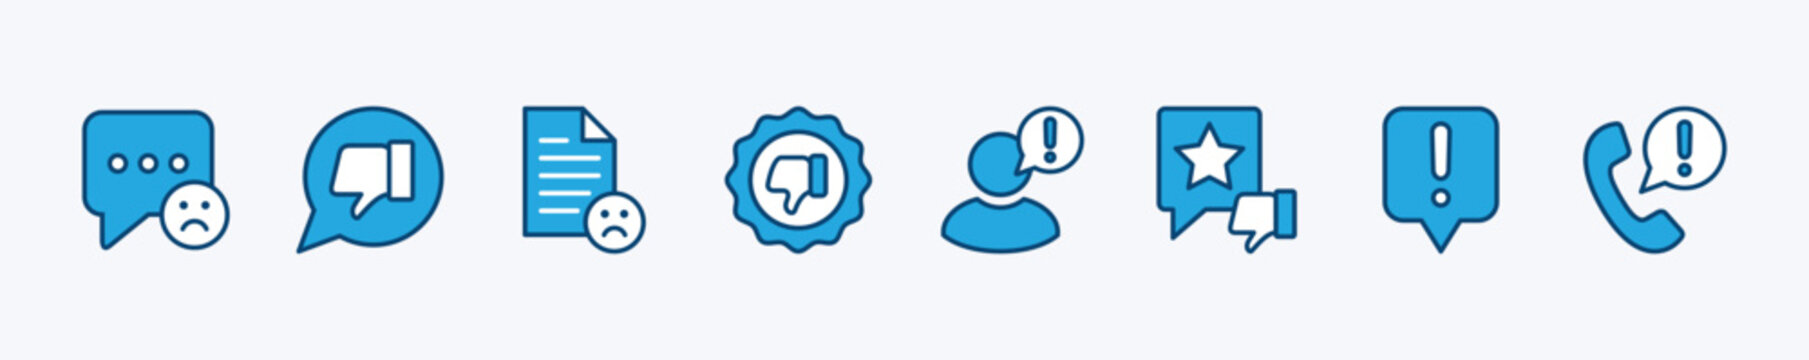 Set of complaint icon for customer service and communication support. Containing poor feedback, unhappy, dislike, 1 star, rating review, comment. Vector illustration